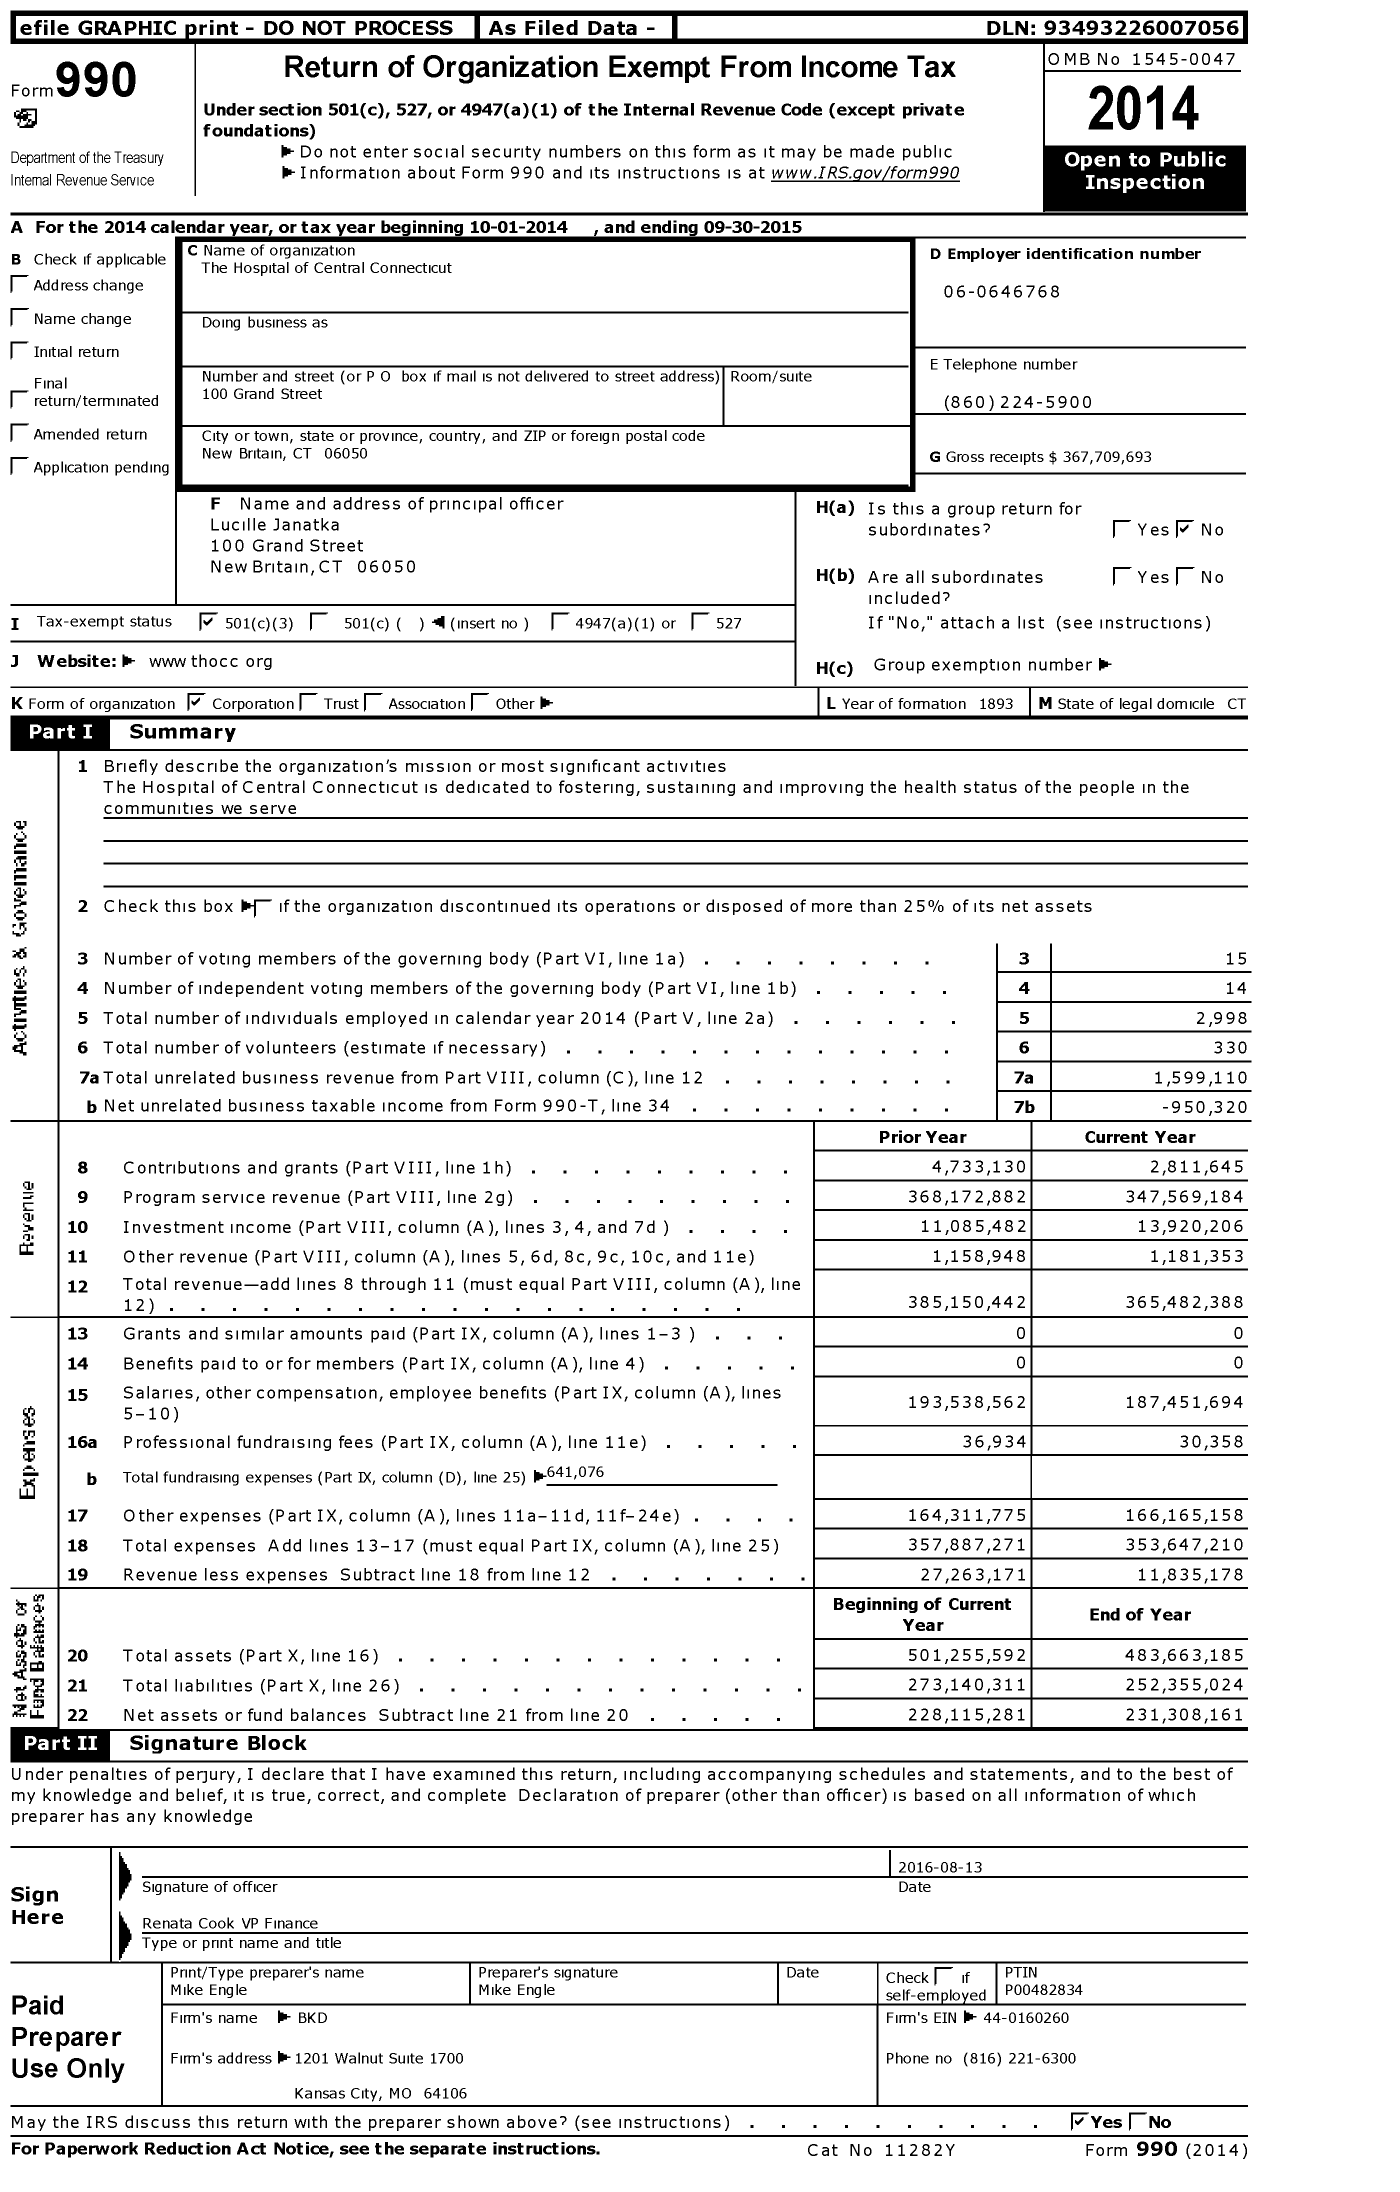 Image of first page of 2014 Form 990 for The Hospital of Central Connecticut (THOCC)